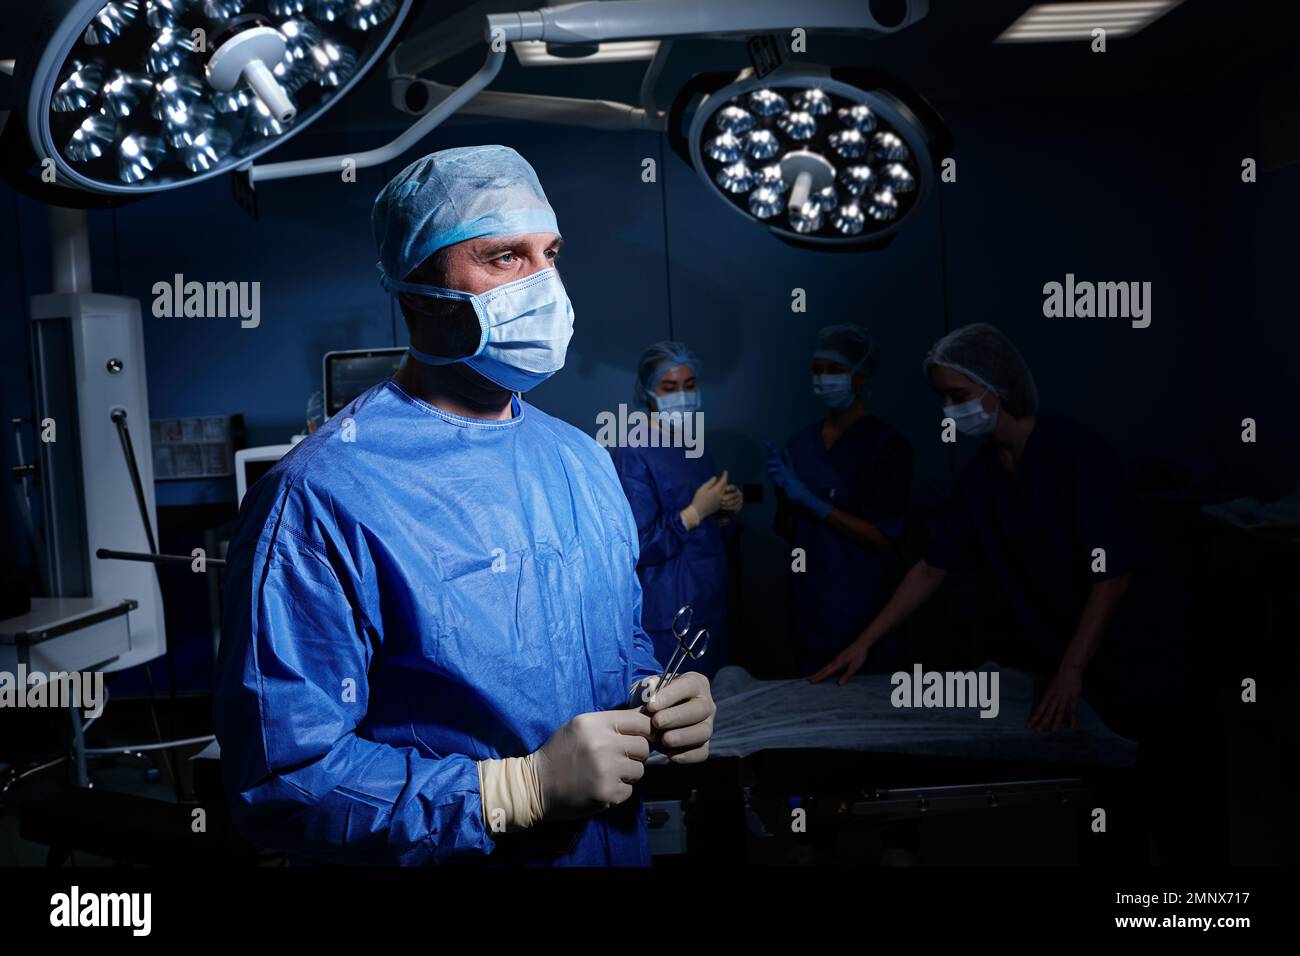 Illuminated portrait of male surgery wearing PPE with surgical scissors in hands standing in operation room with medical team Stock Photo